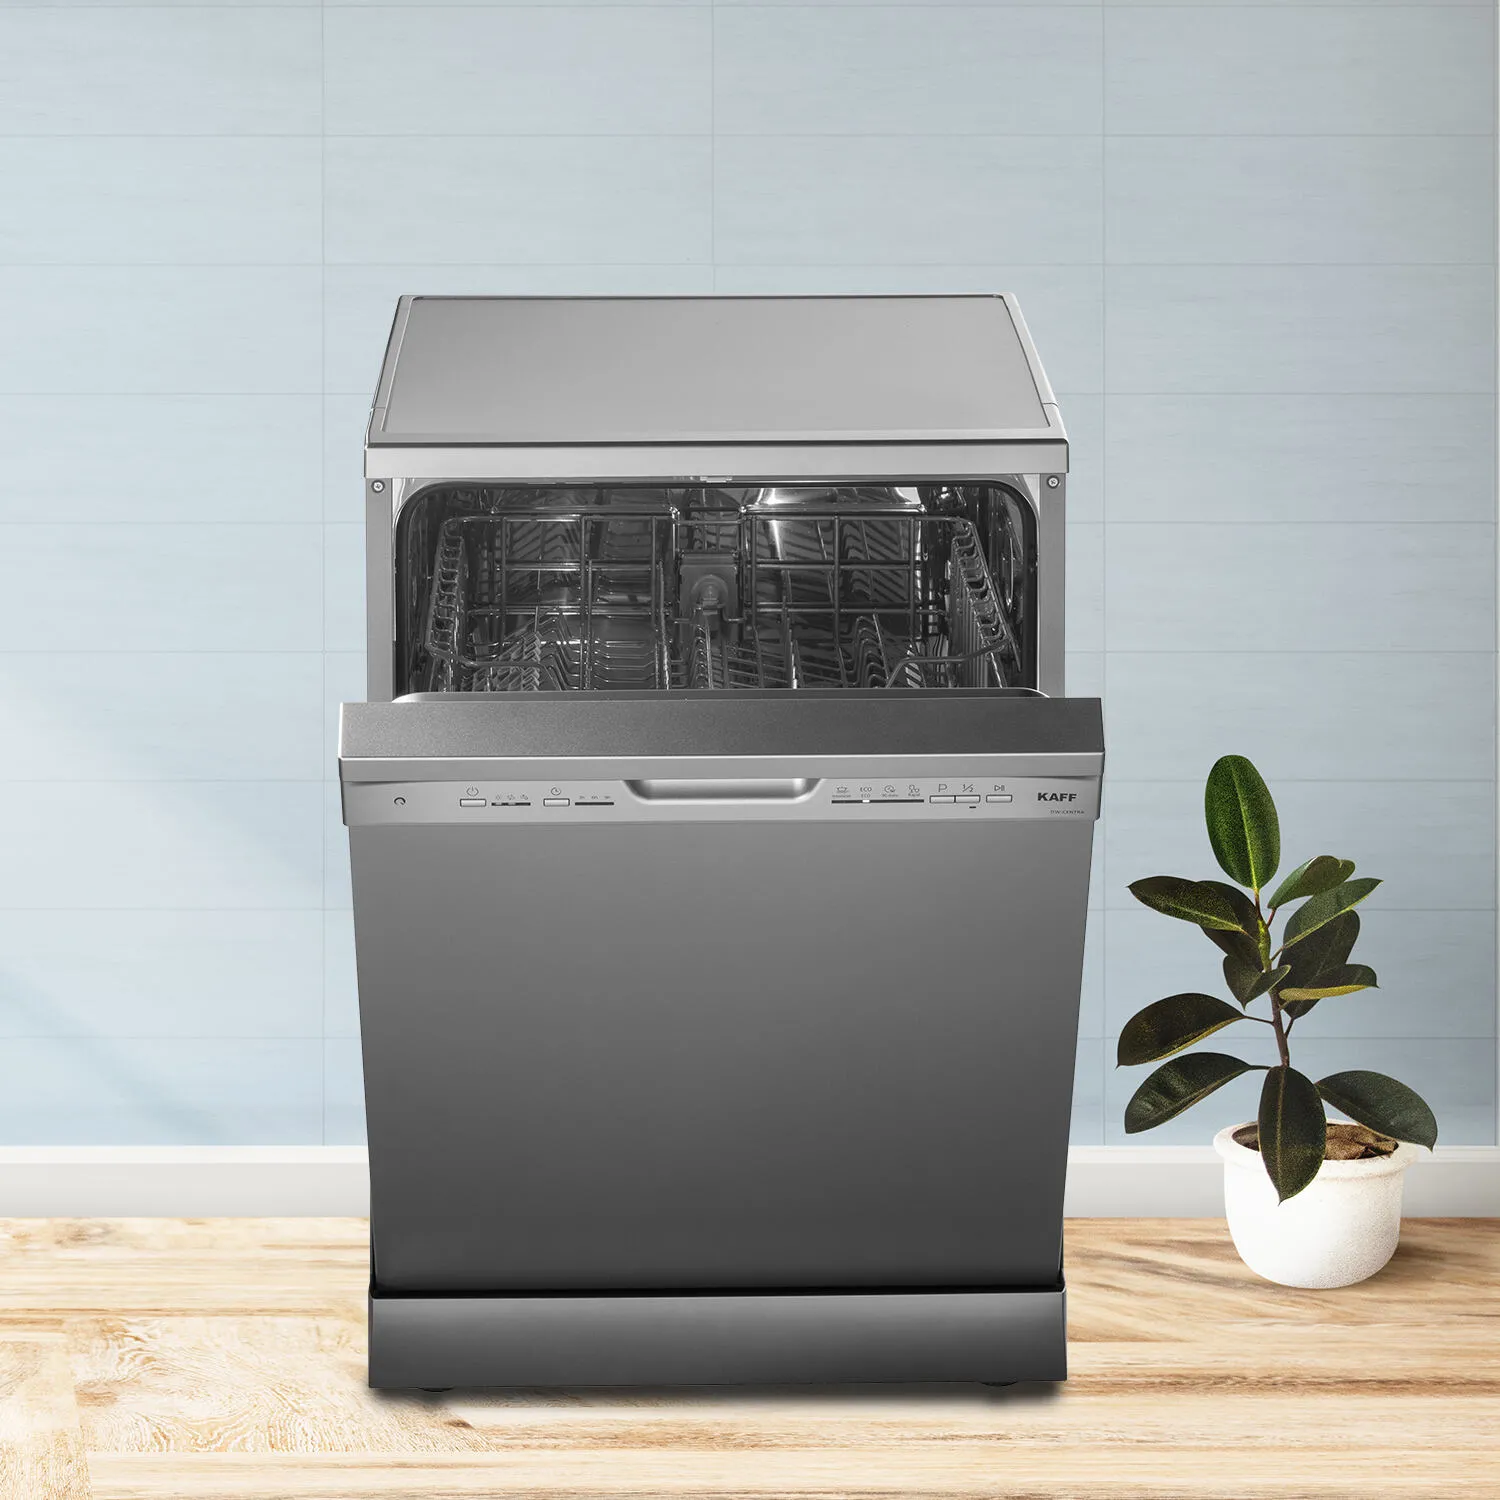 KAFF dishwasher CENTRA 60 ideal for your Indian kitchen at an affordable price